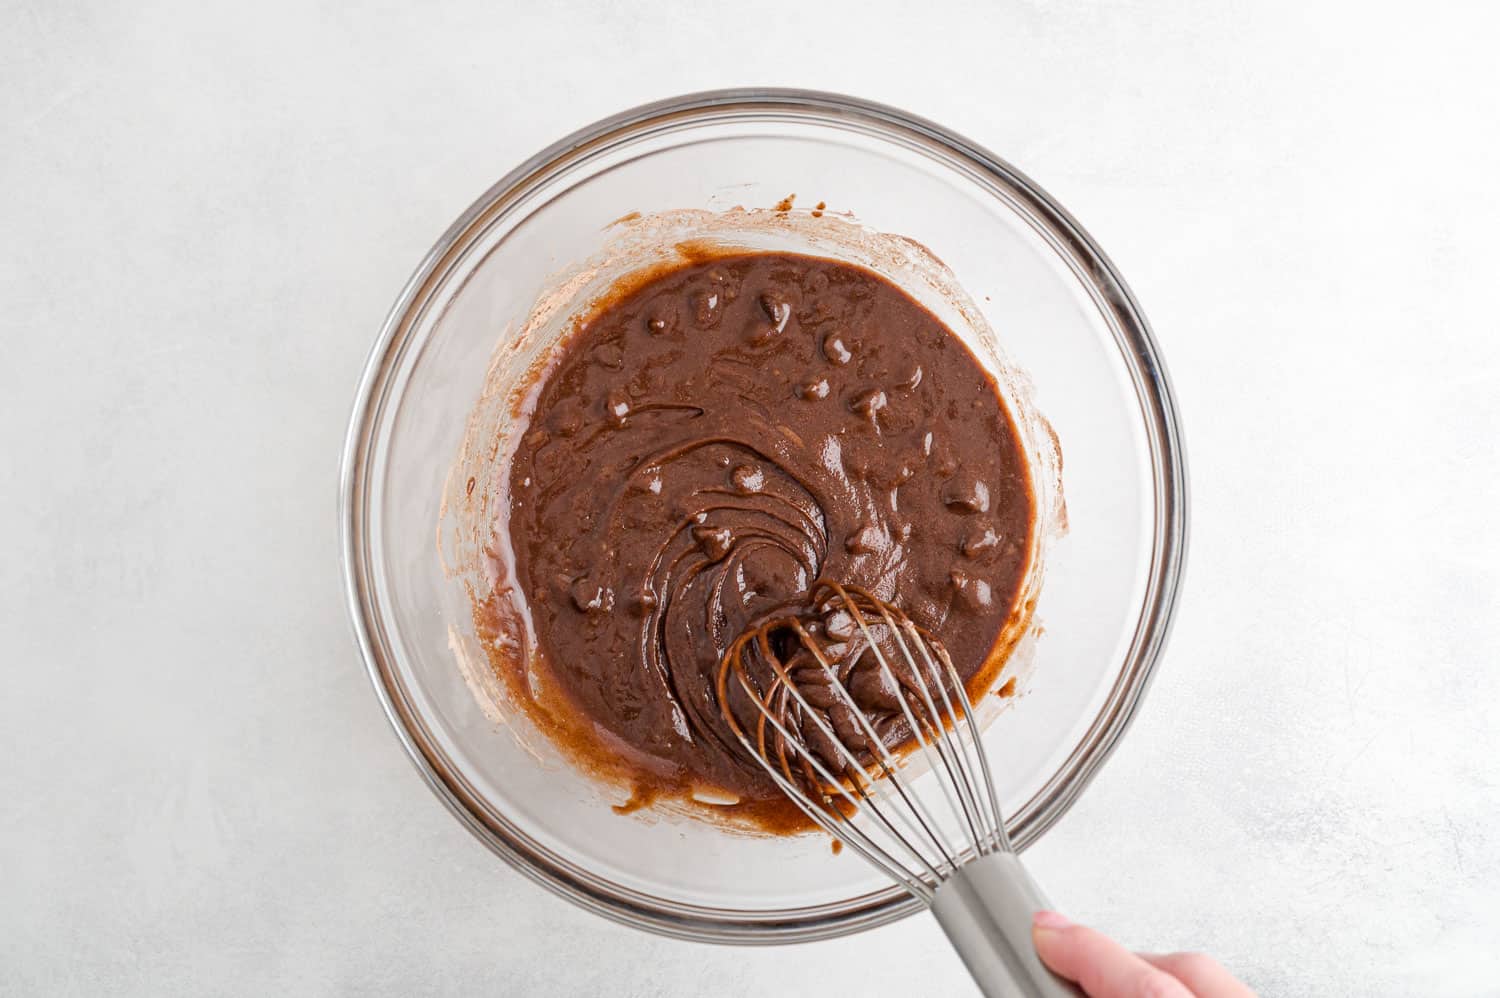 Brownie batter in a clear glass mixing bowl.